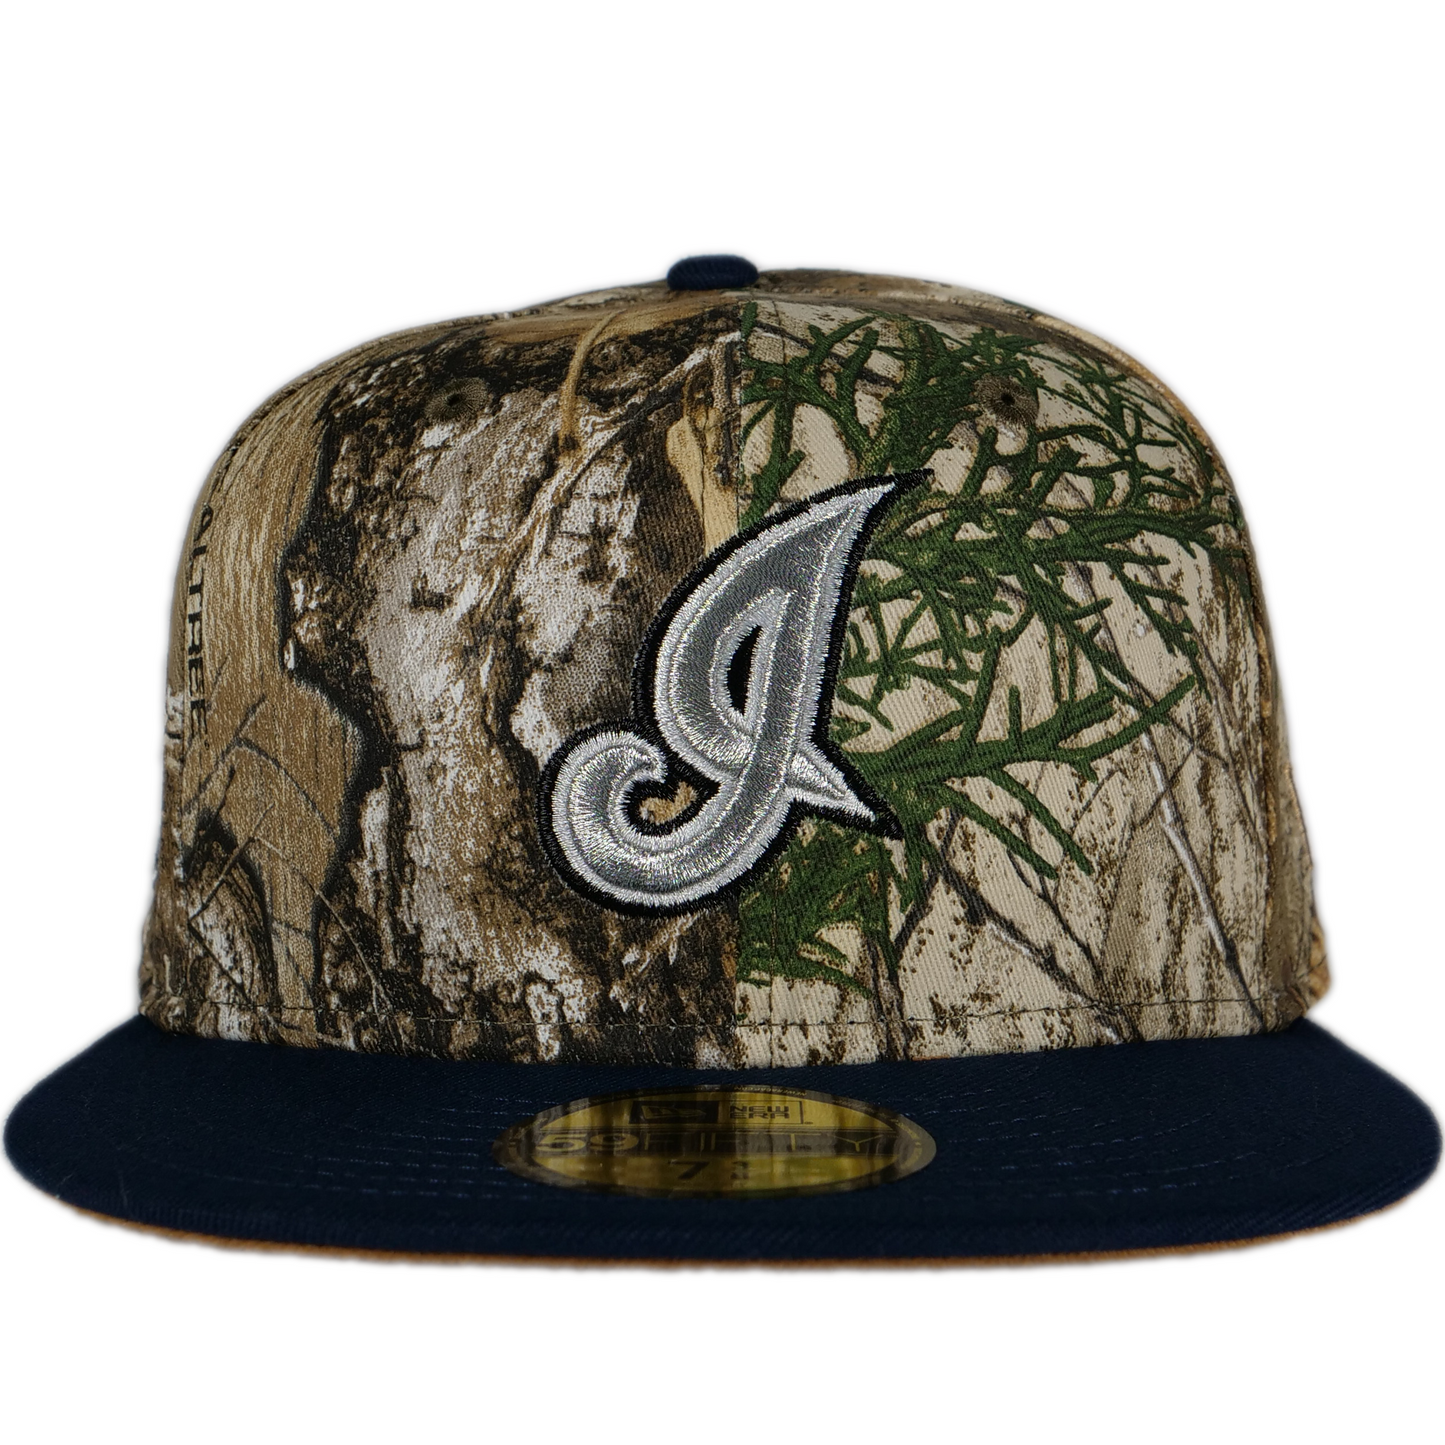 New Era Cleveland Indians 59FIFTY Fitted Hat - Camo/ Navy Blue/ Khaki